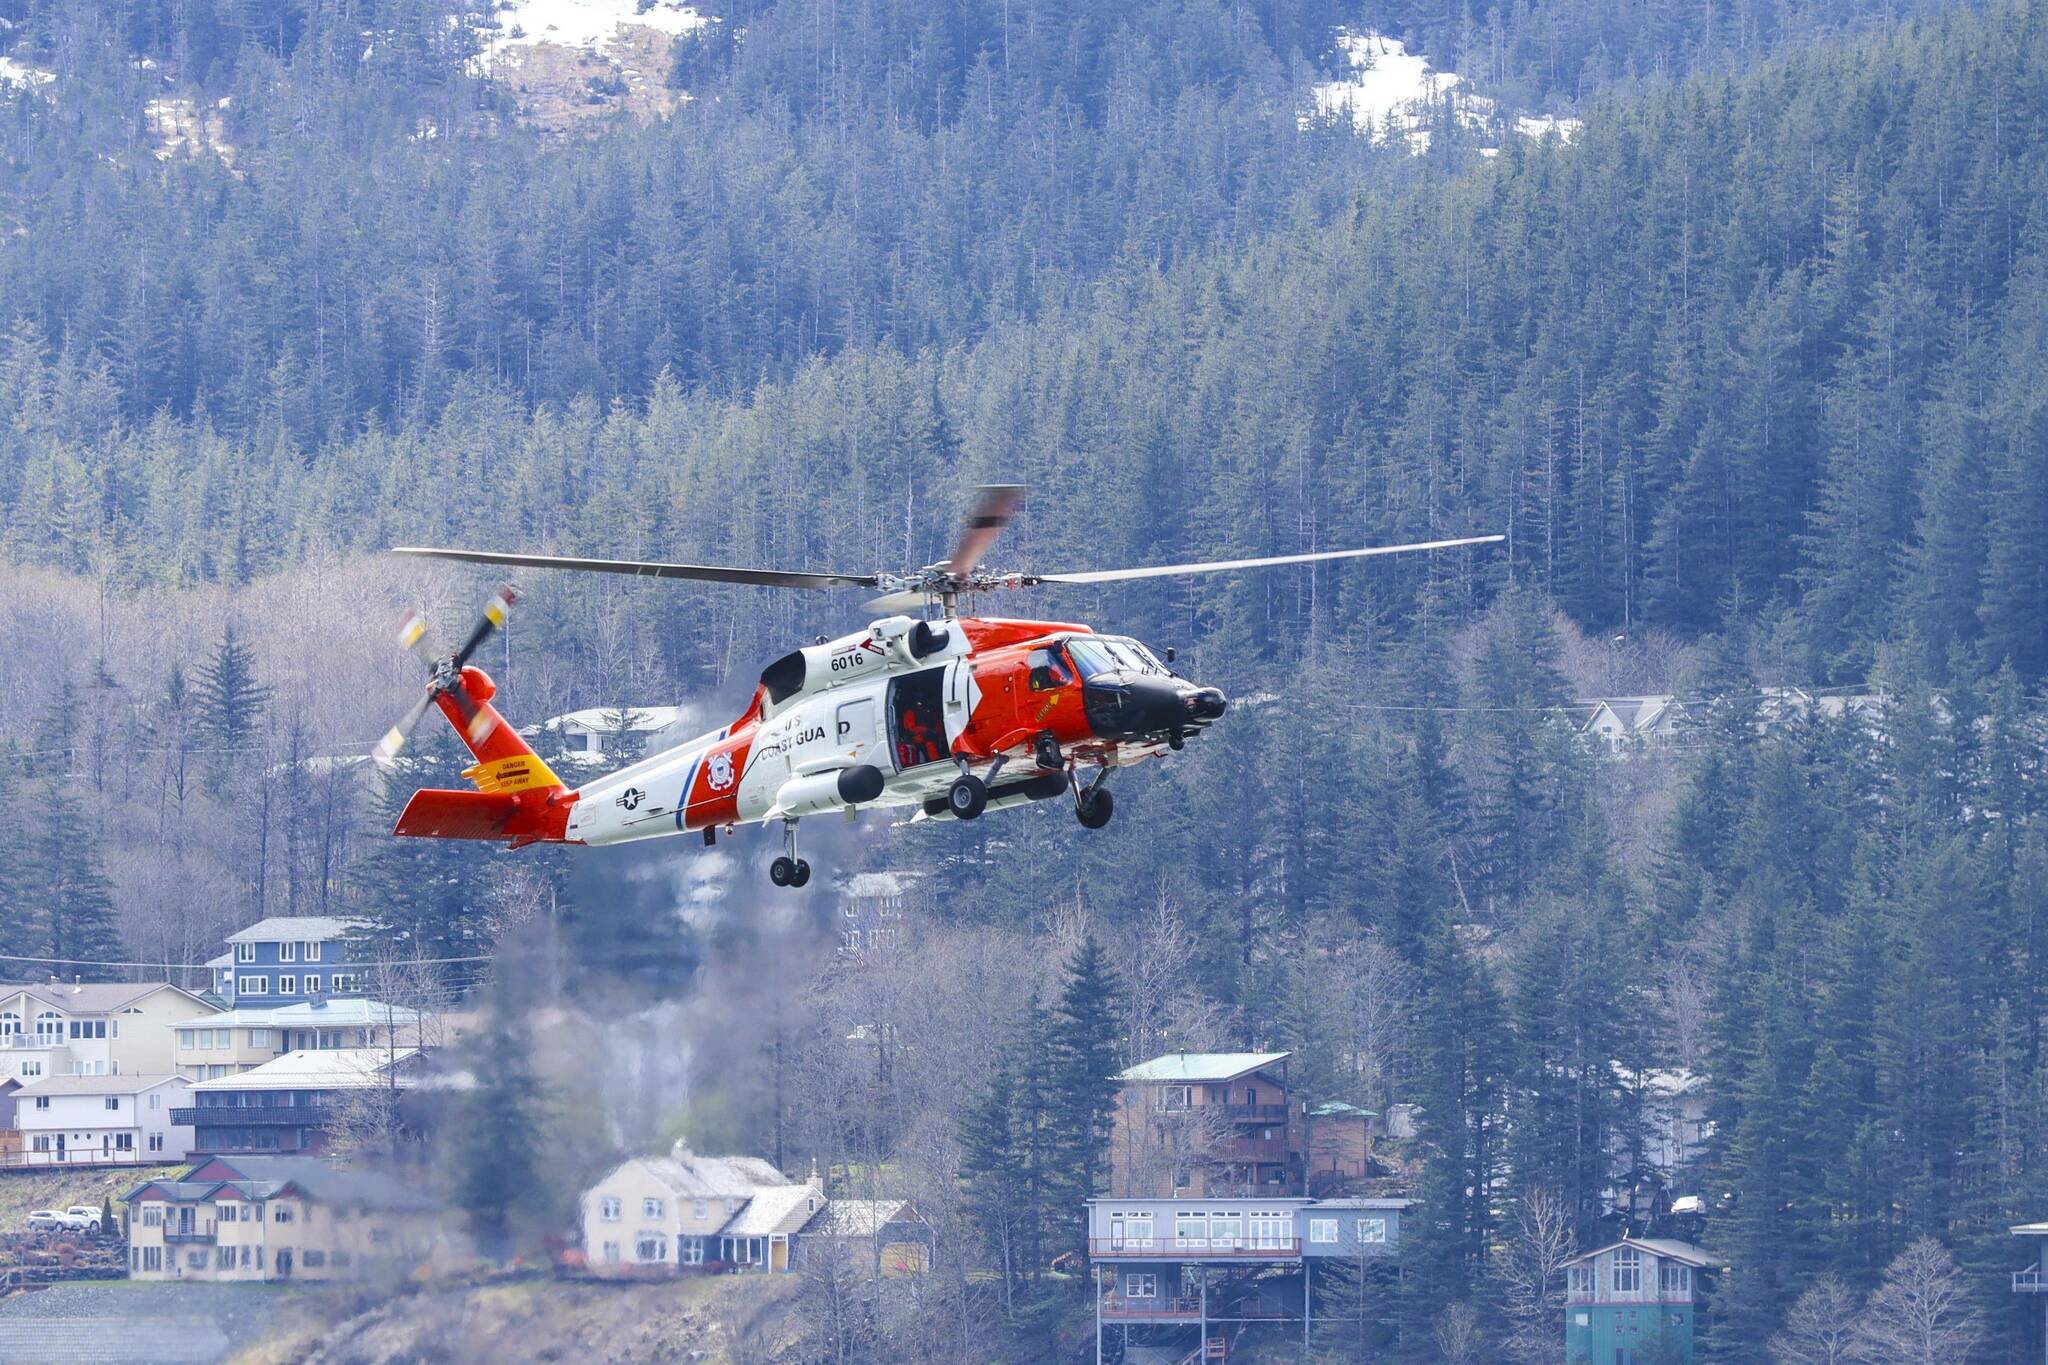 Coast Guard Sector Juneau deployed a number of assets including an MH-60 Jayhawk to search for a woman reported fallen overboard from a cruise ship near the Eldred Rock Lighthouse in the Lynn Canal on May 17, 2022. (Michael S. Lockett / Juneau Empire File)